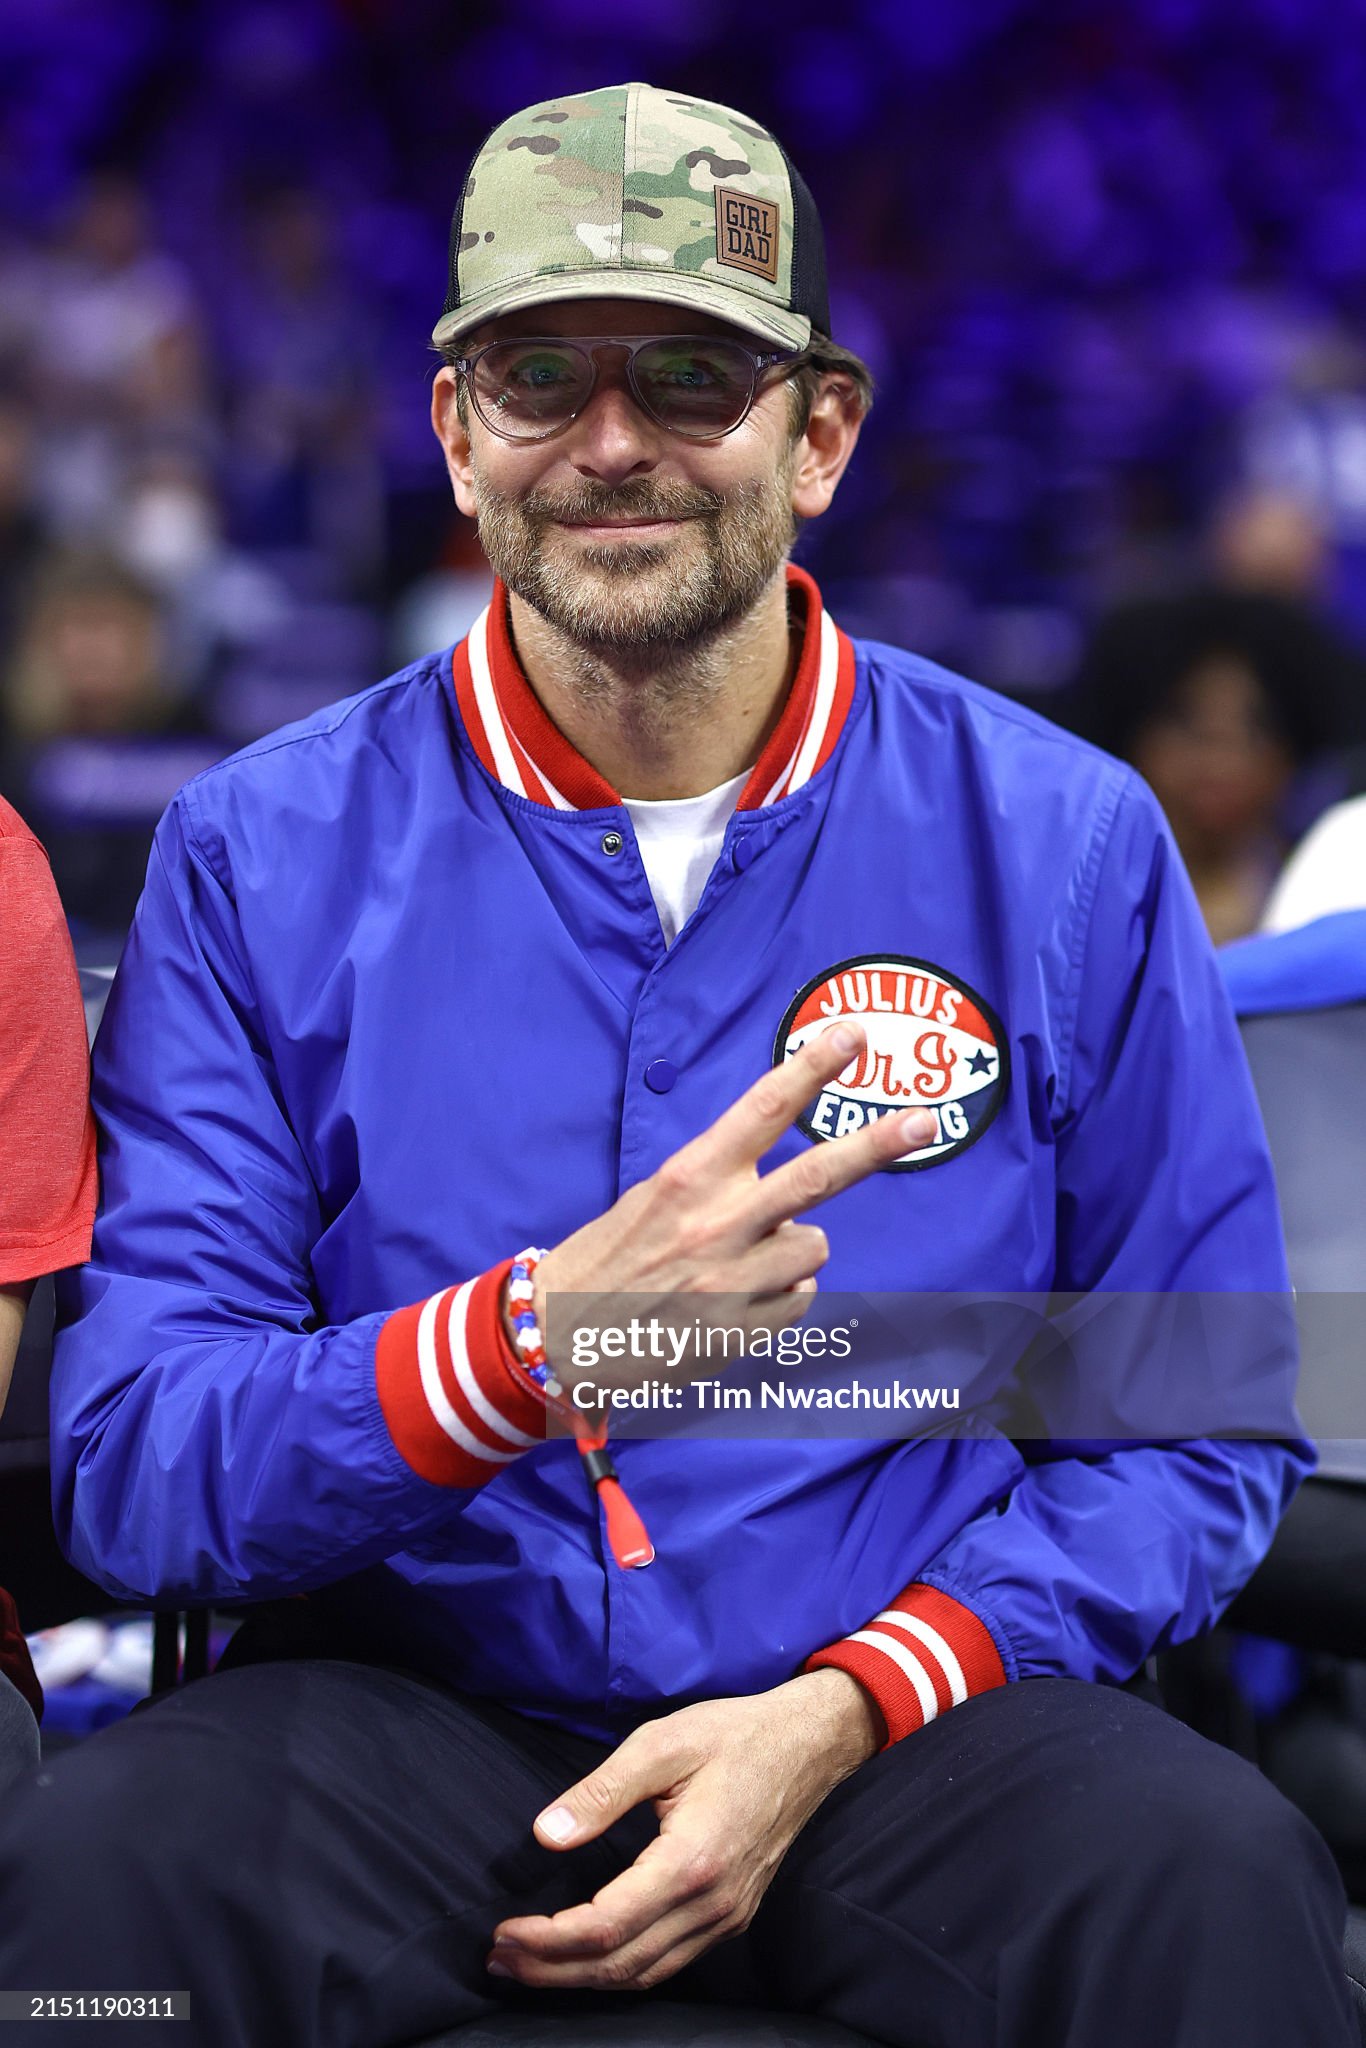 gettyimages-2151190311-2048x2048.jpg